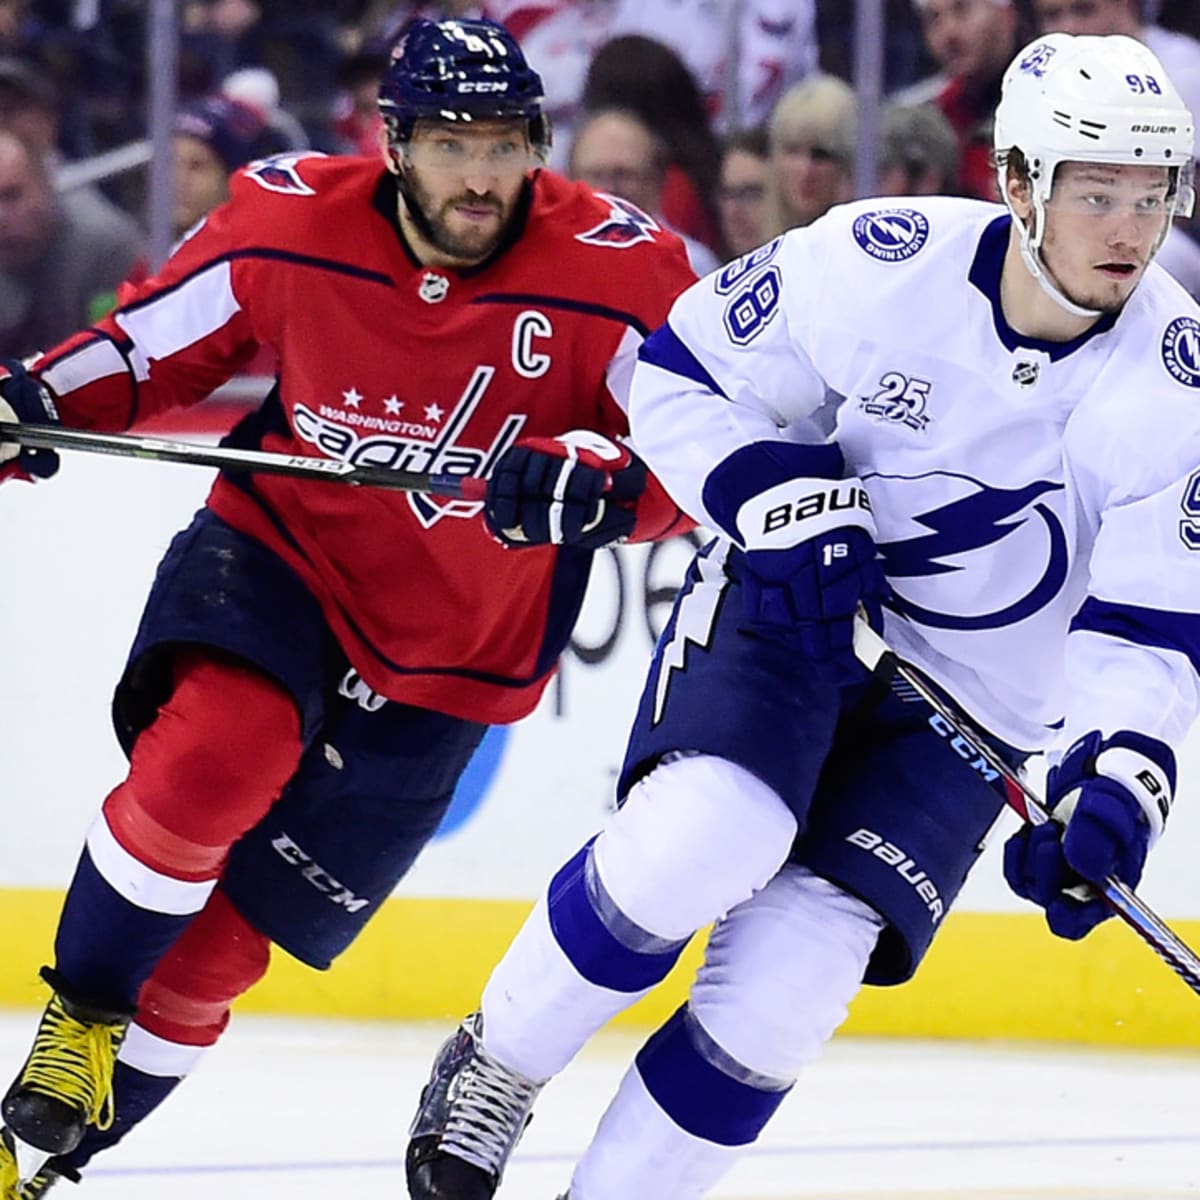 Stanley Cup Final Preview: Can the Bolts run it back? - That's So Tampa